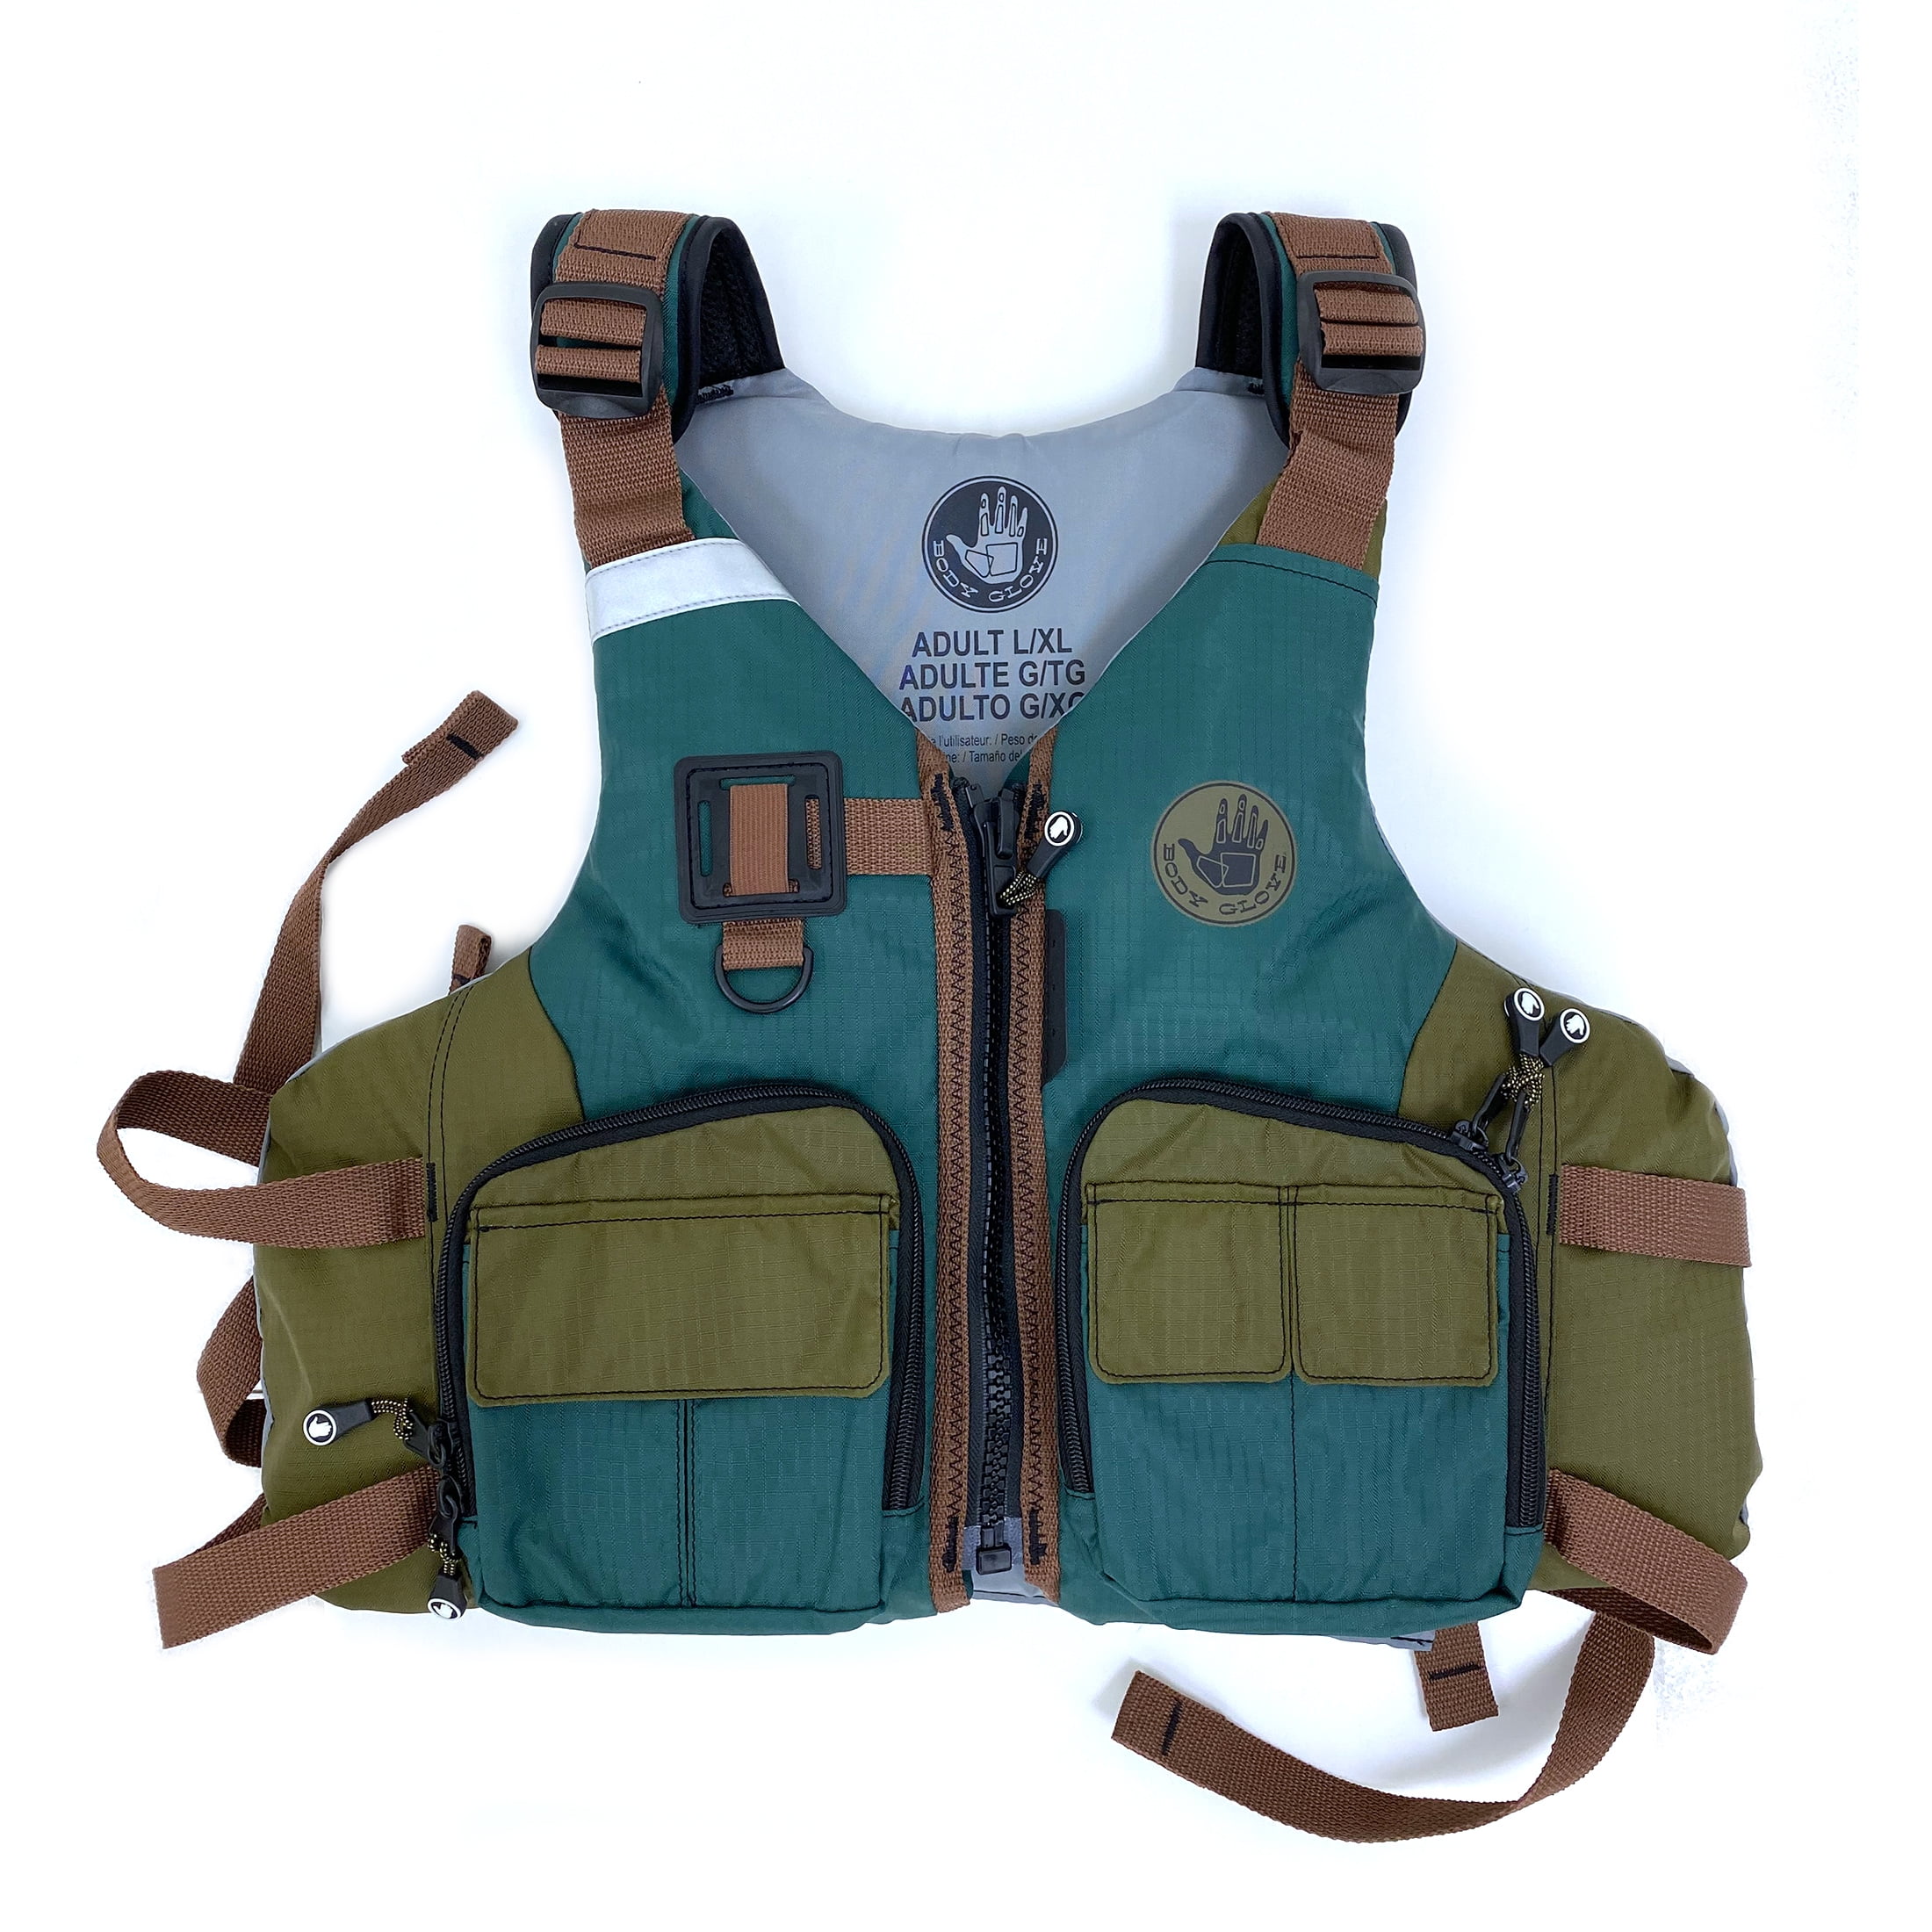 Body Glove Adult Deluxe Outdoor Fishing & Paddling Vest Size L/XL, Green